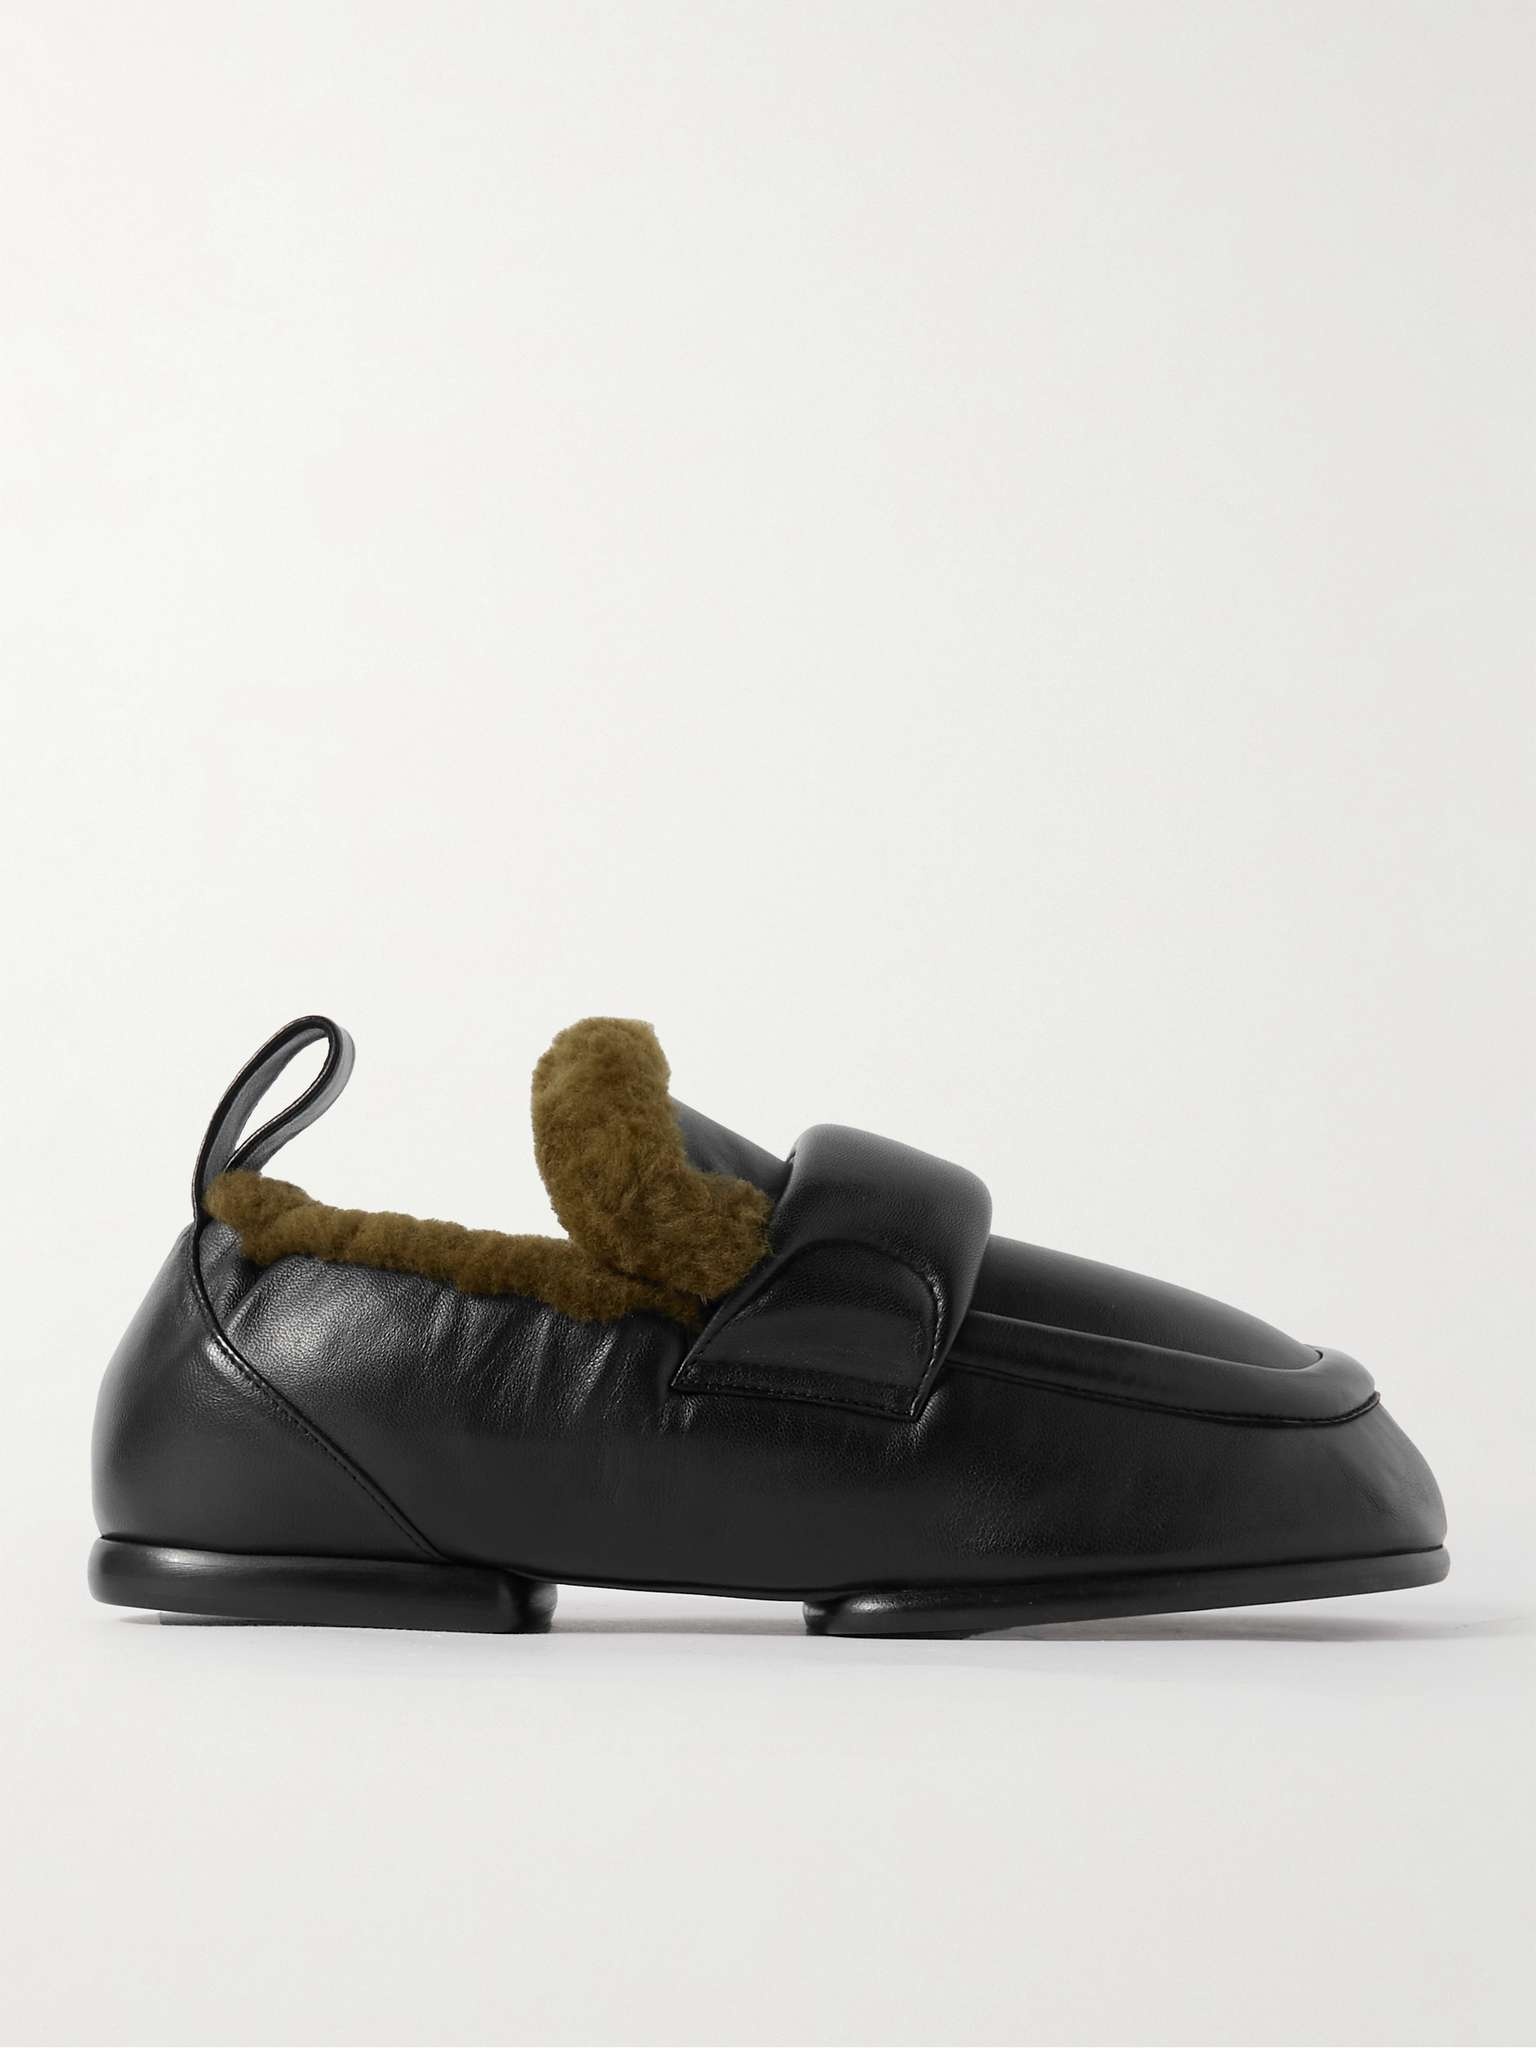 Dries Van Noten Shearling-Lined Leather Loafers | REVERSIBLE